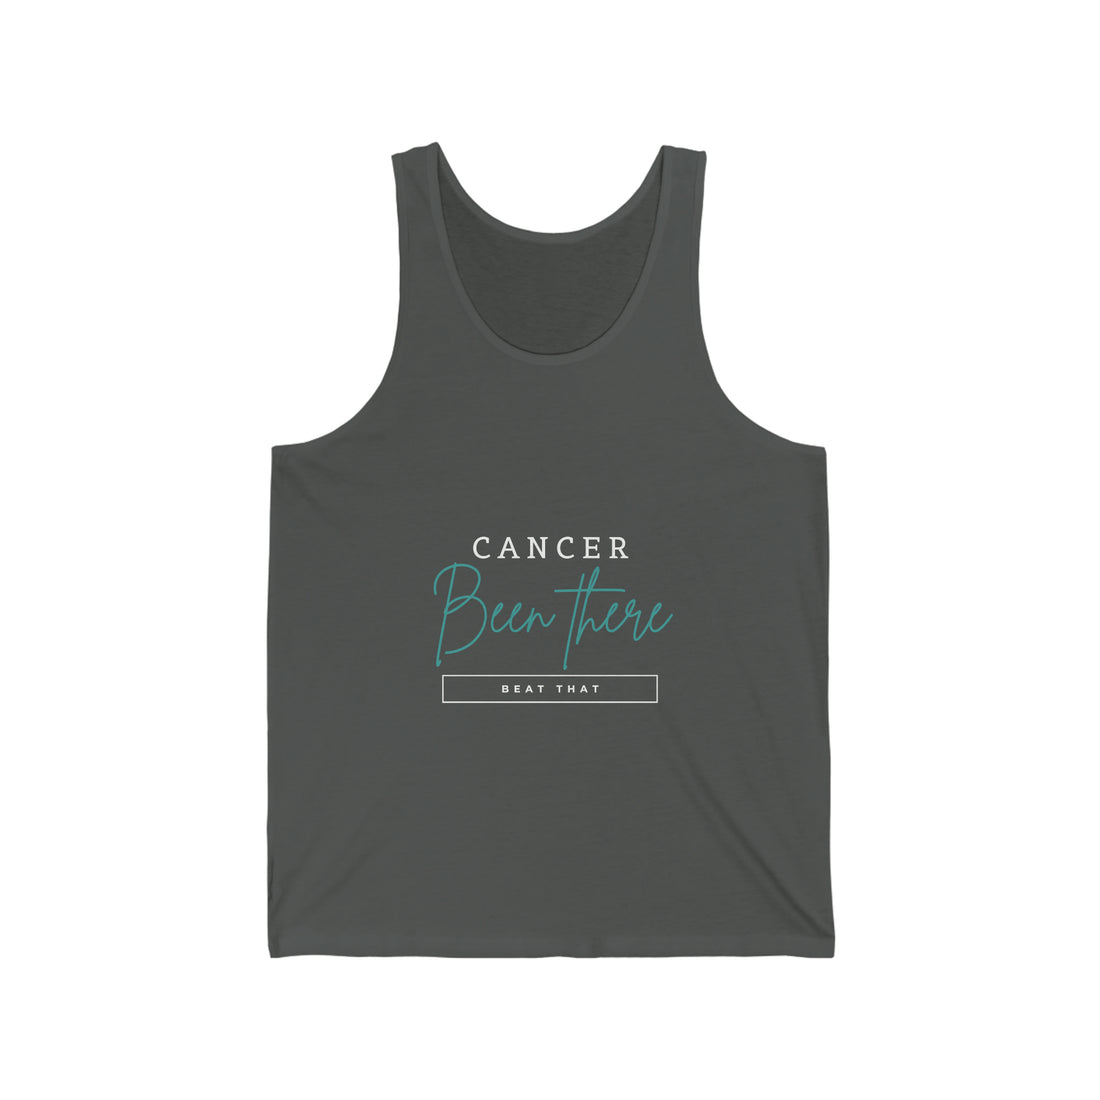 Cancer Been There Beat That - Unisex Jersey Tank Top